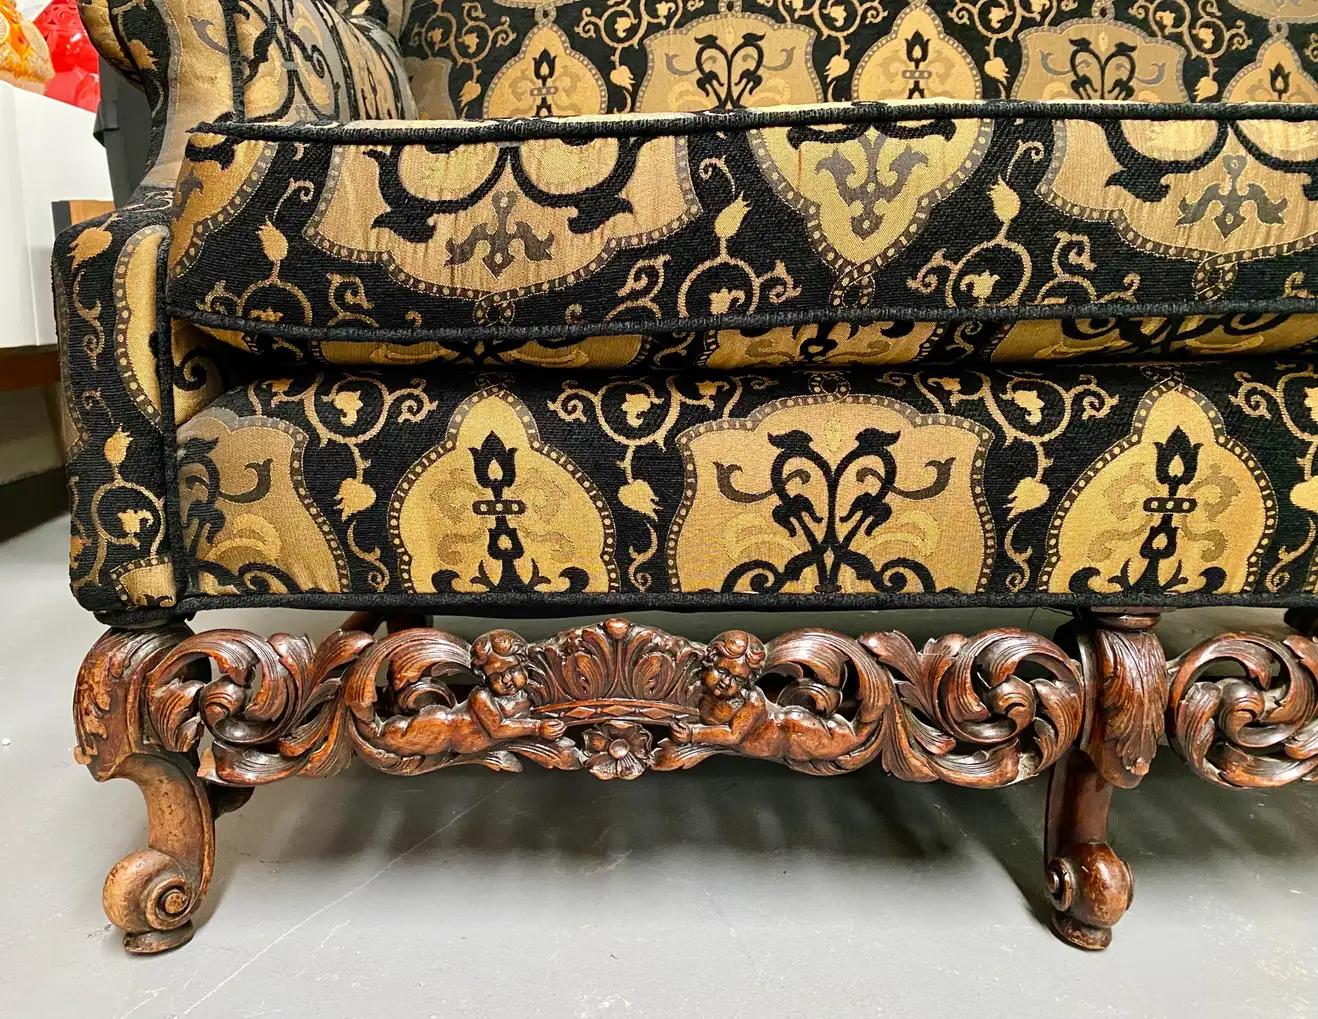 Italian Rococo Revival Style Settee or Sofa, Black and Beige Upholstery, a Pair For Sale 10